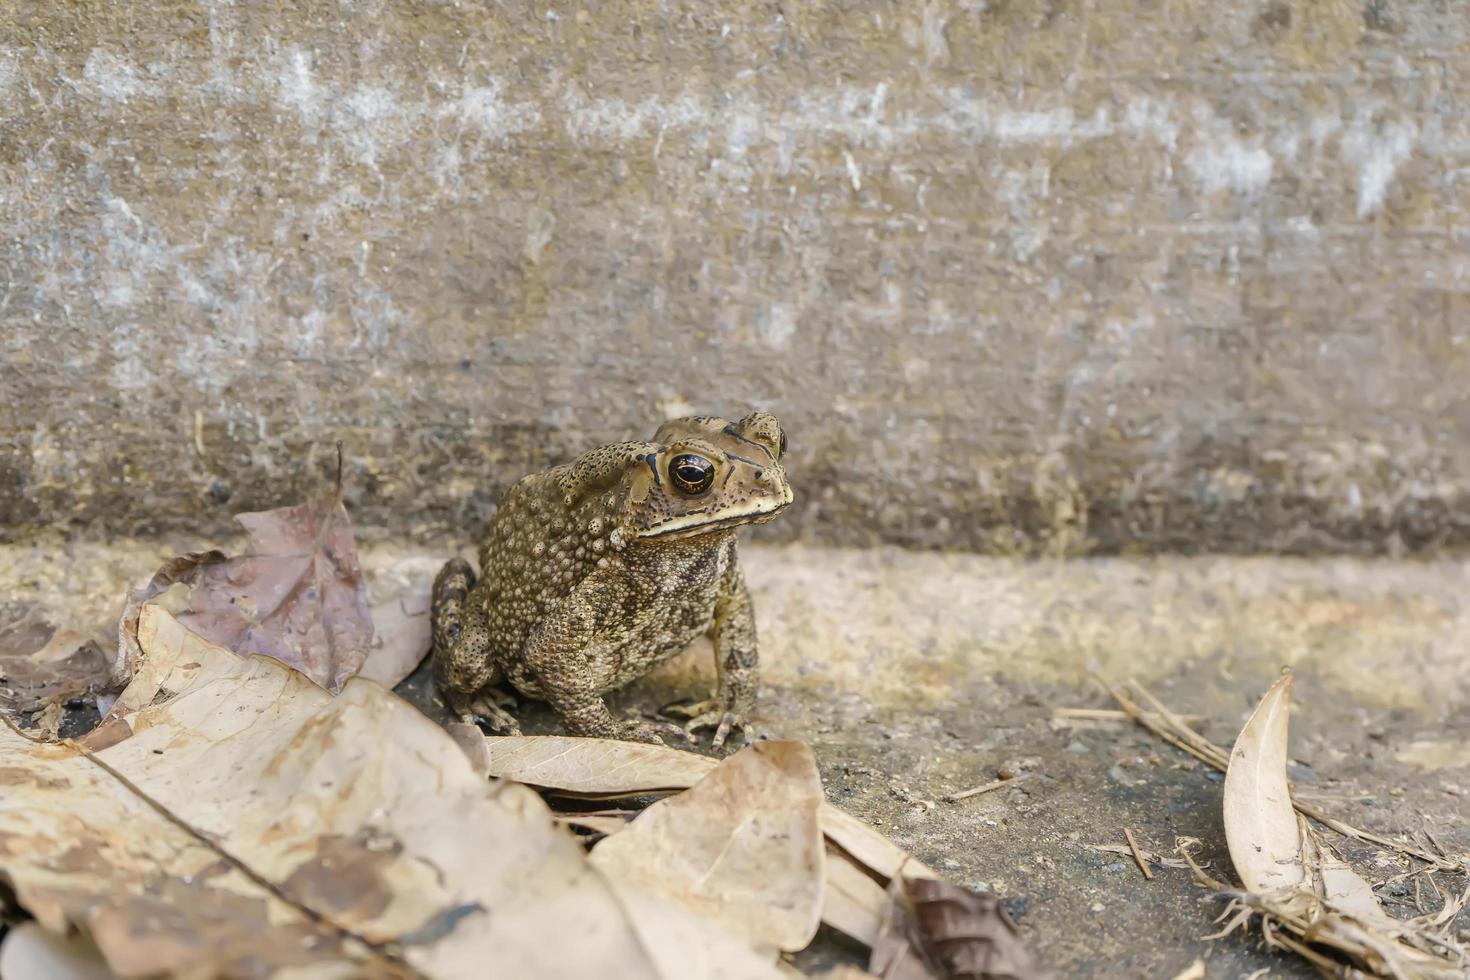 The toad are posing on the ground of cement. photo